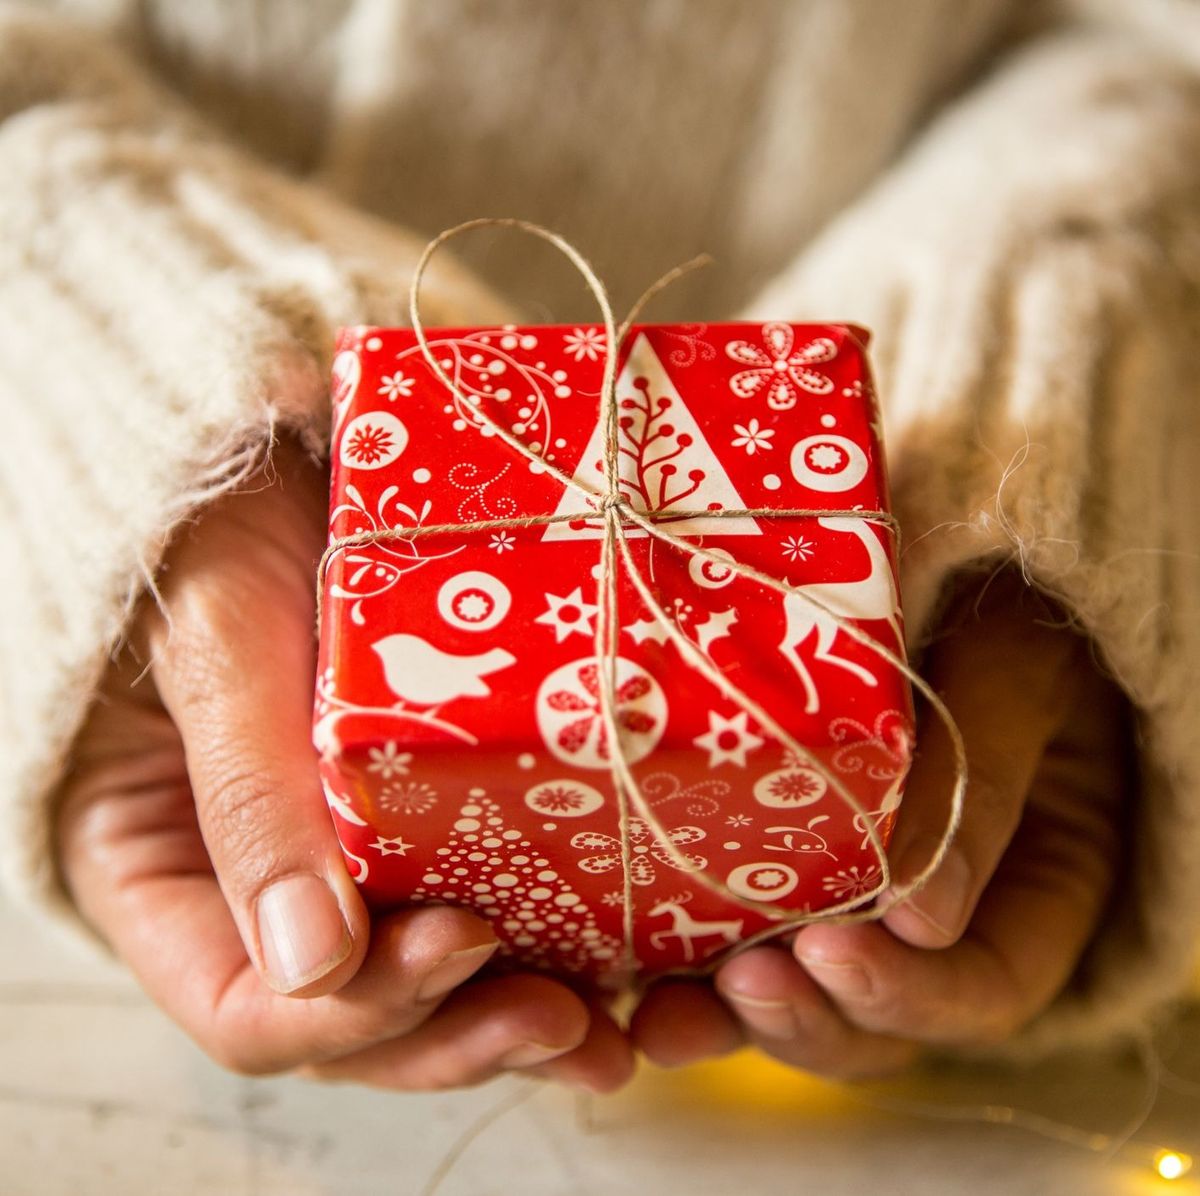 9 Best Christmas Gift Exchange Ideas for Family and Friends 2022